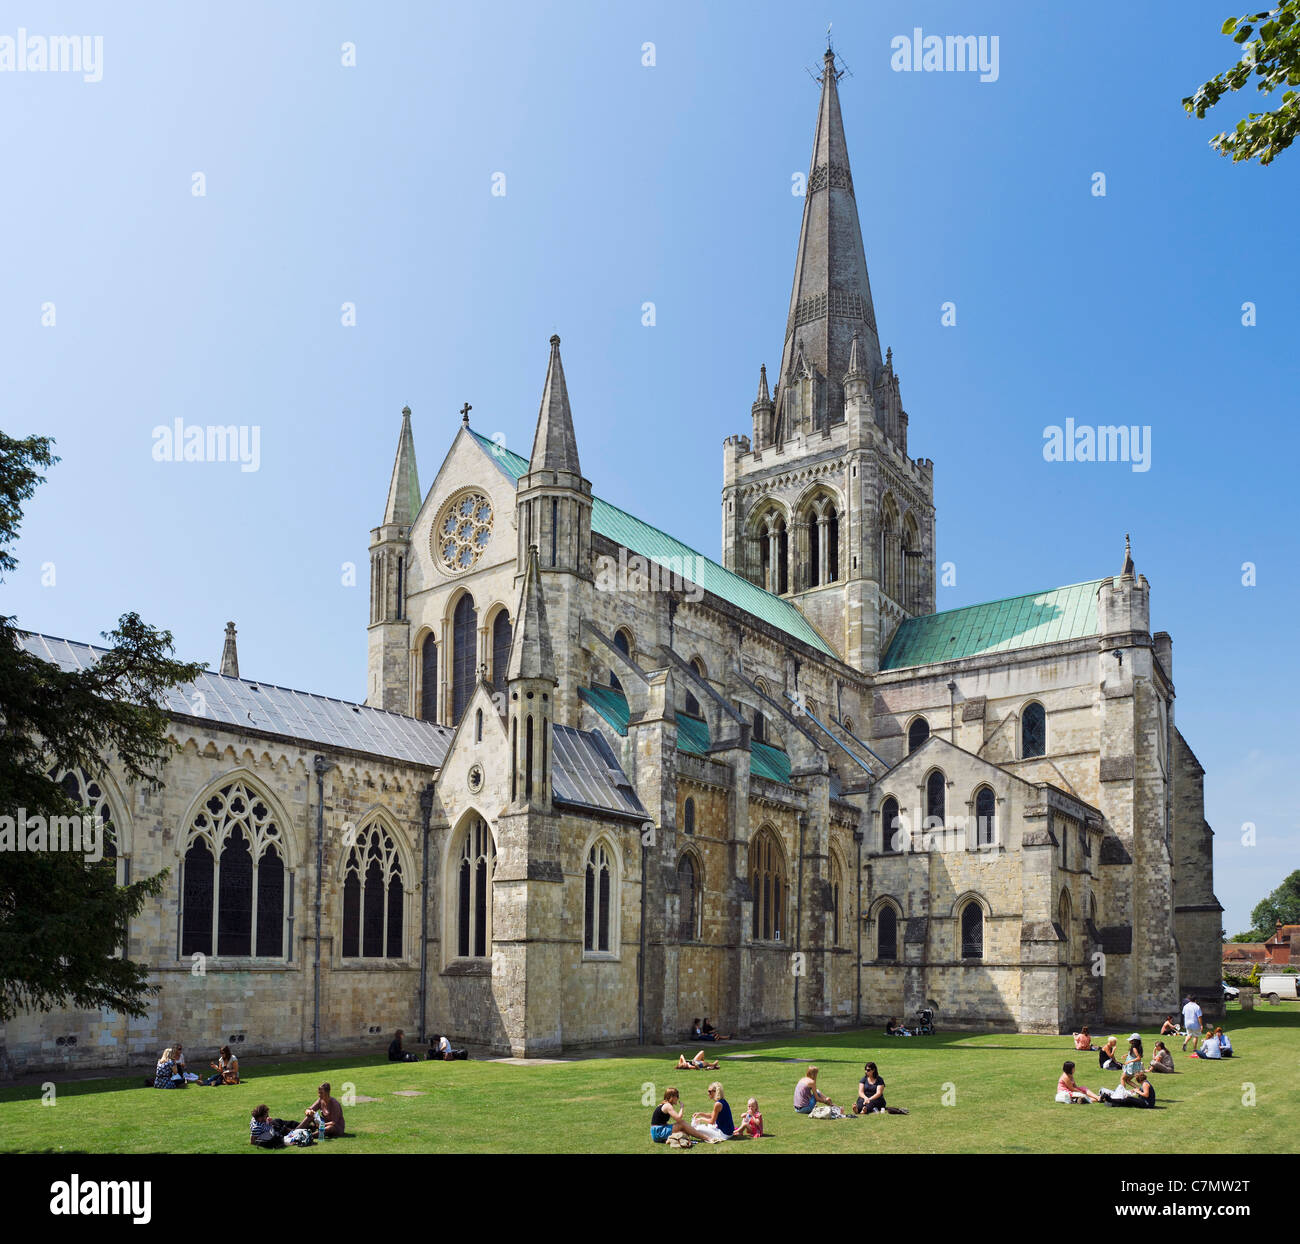 Chichester Kathedrale, Chichester, West Sussex, England, UK Stockfoto